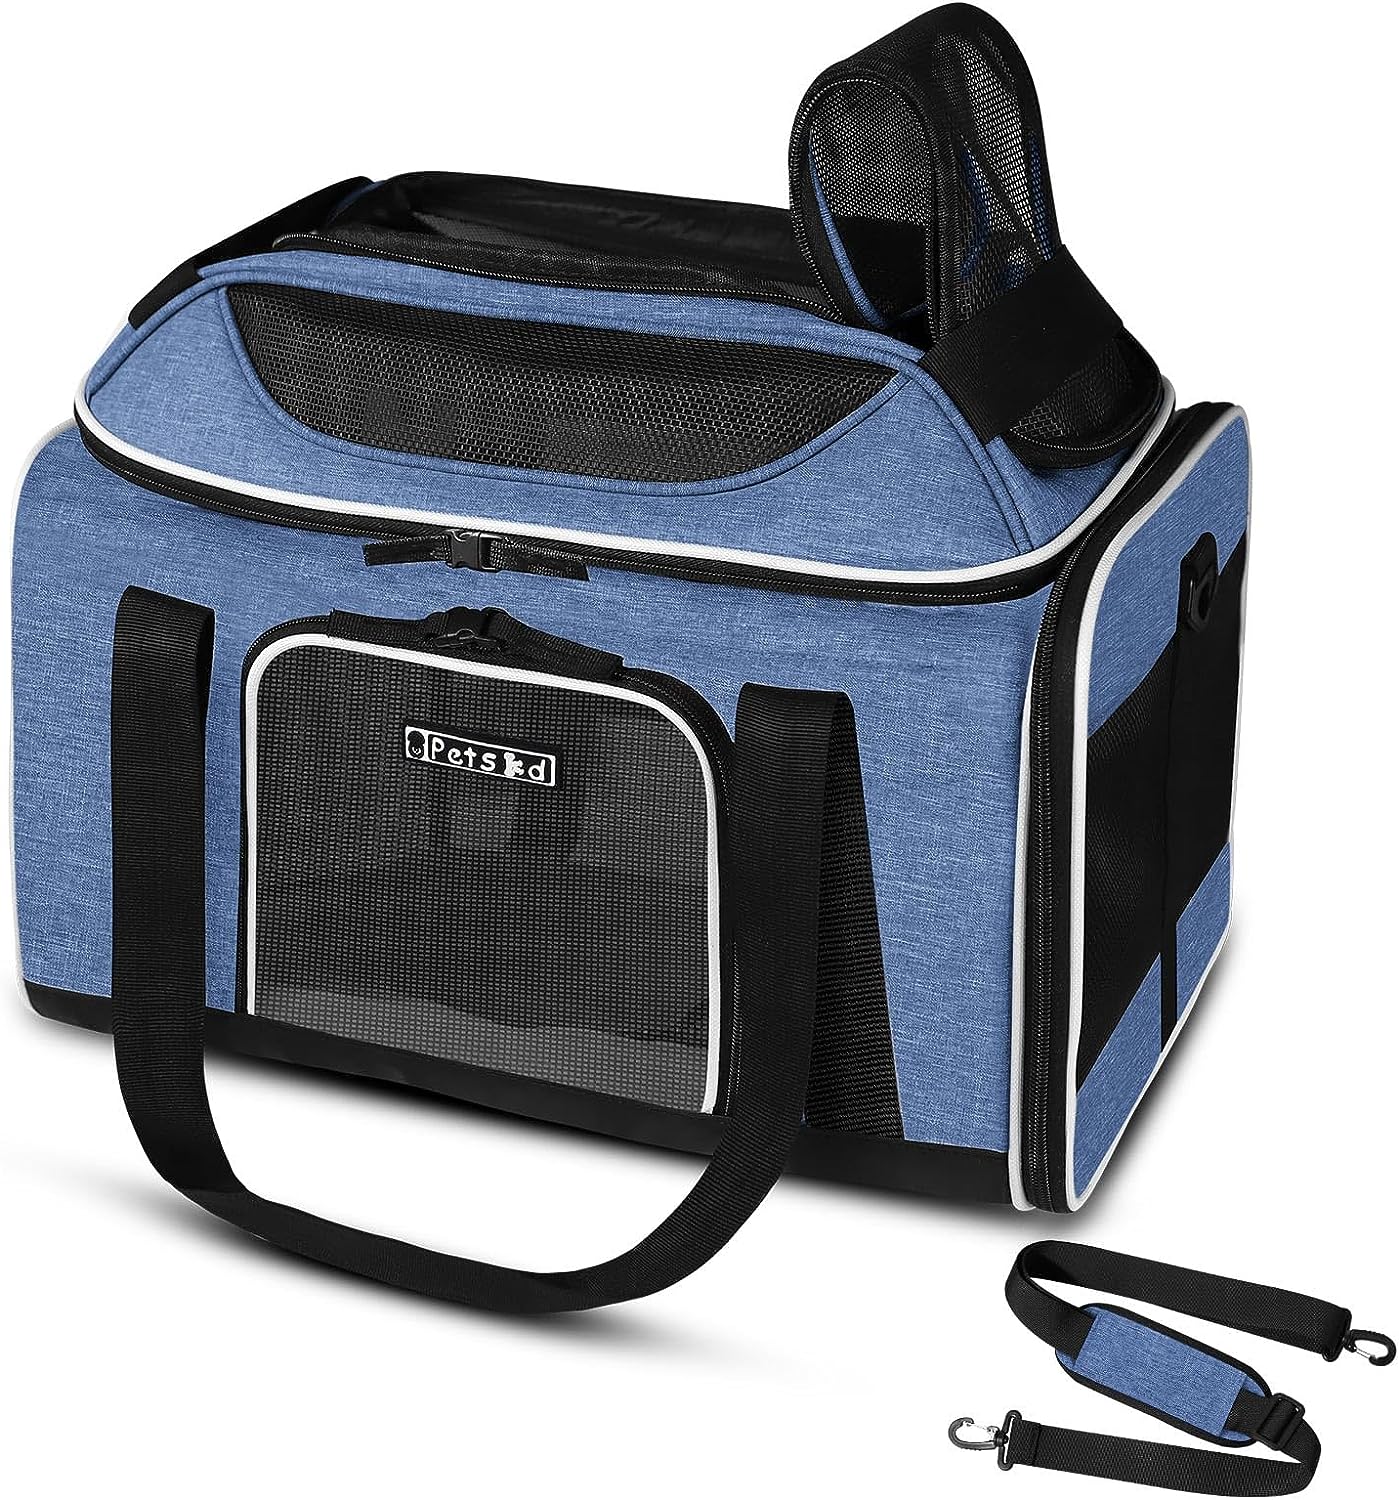 Read more about the article Petskd Pet Carrier Review